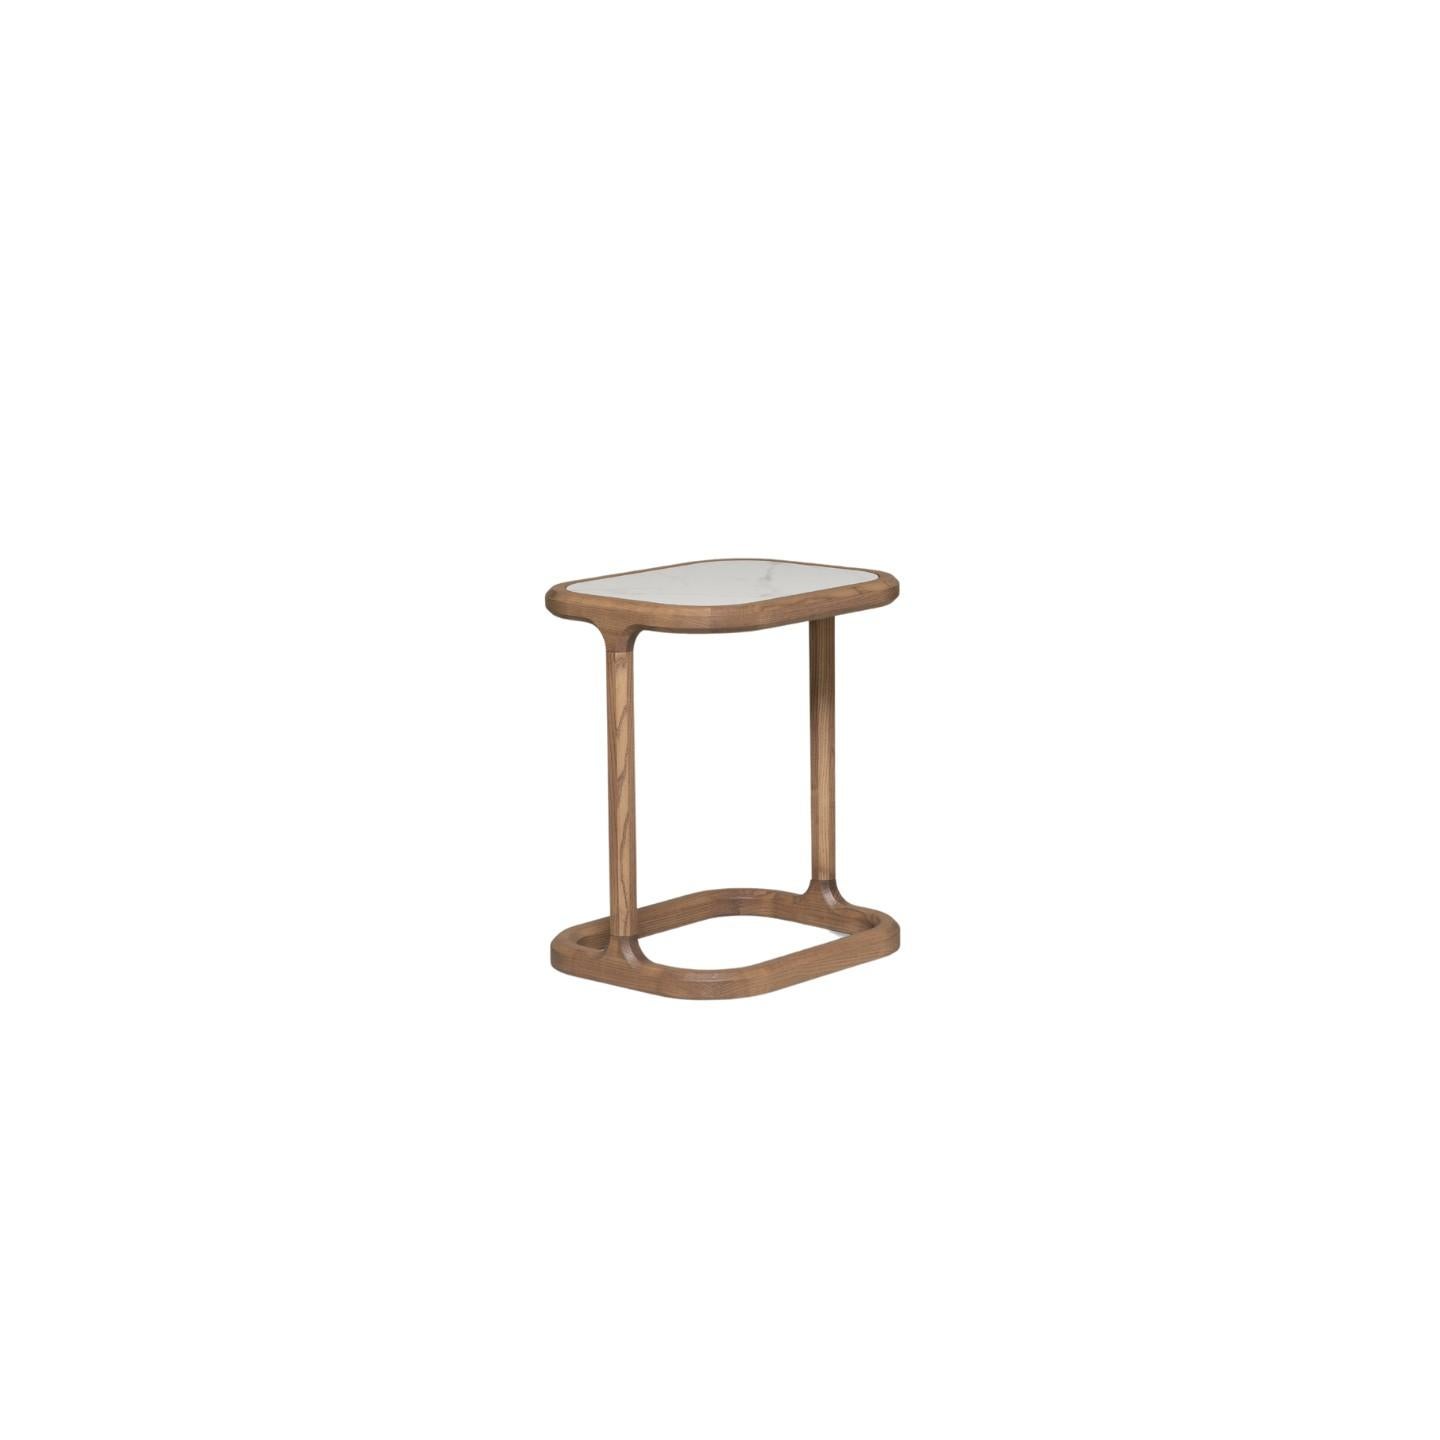 Contemporary low table made of ash wood, designed by Libero Rutilo
The table can have wooden, glass or stone top: available stones
Emperador dark
Sahara Noir
Pulpis brown
White calacatta.


 